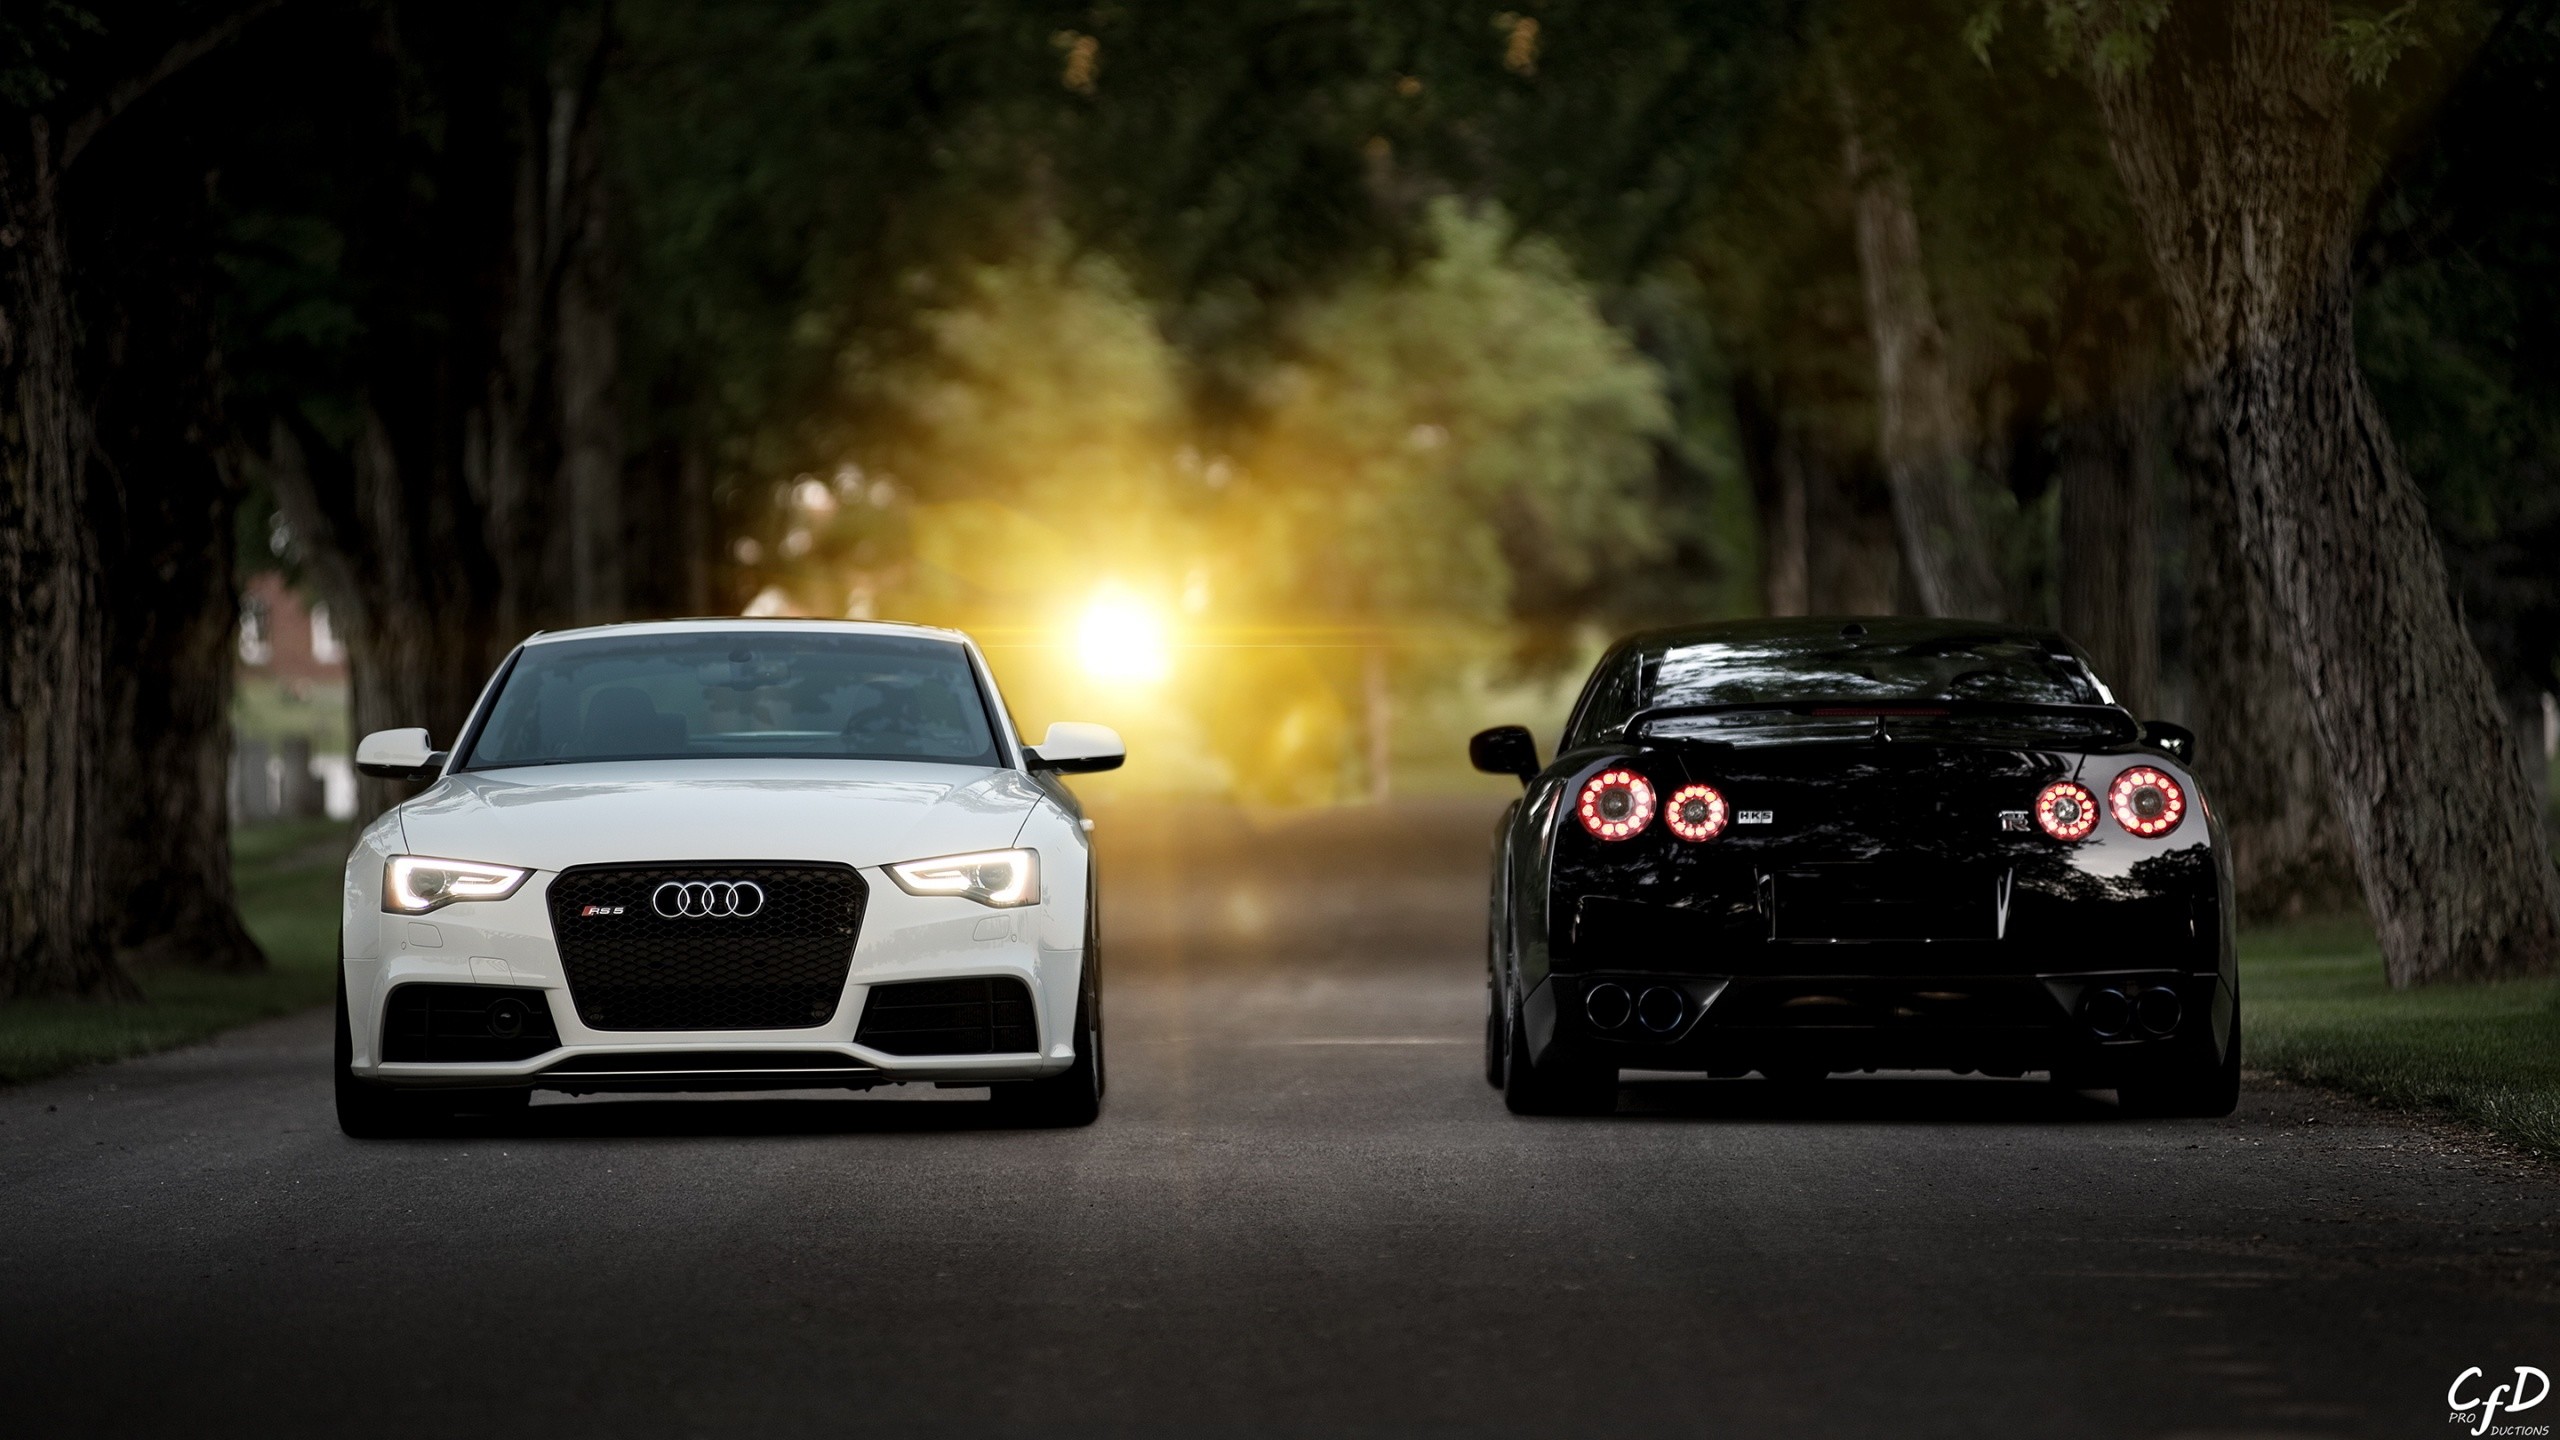 2560x1440 1920x1080. Above Is Audi Rs5 Nissan Gtr 35 Wallpaper In Resolution 2560Ã1440